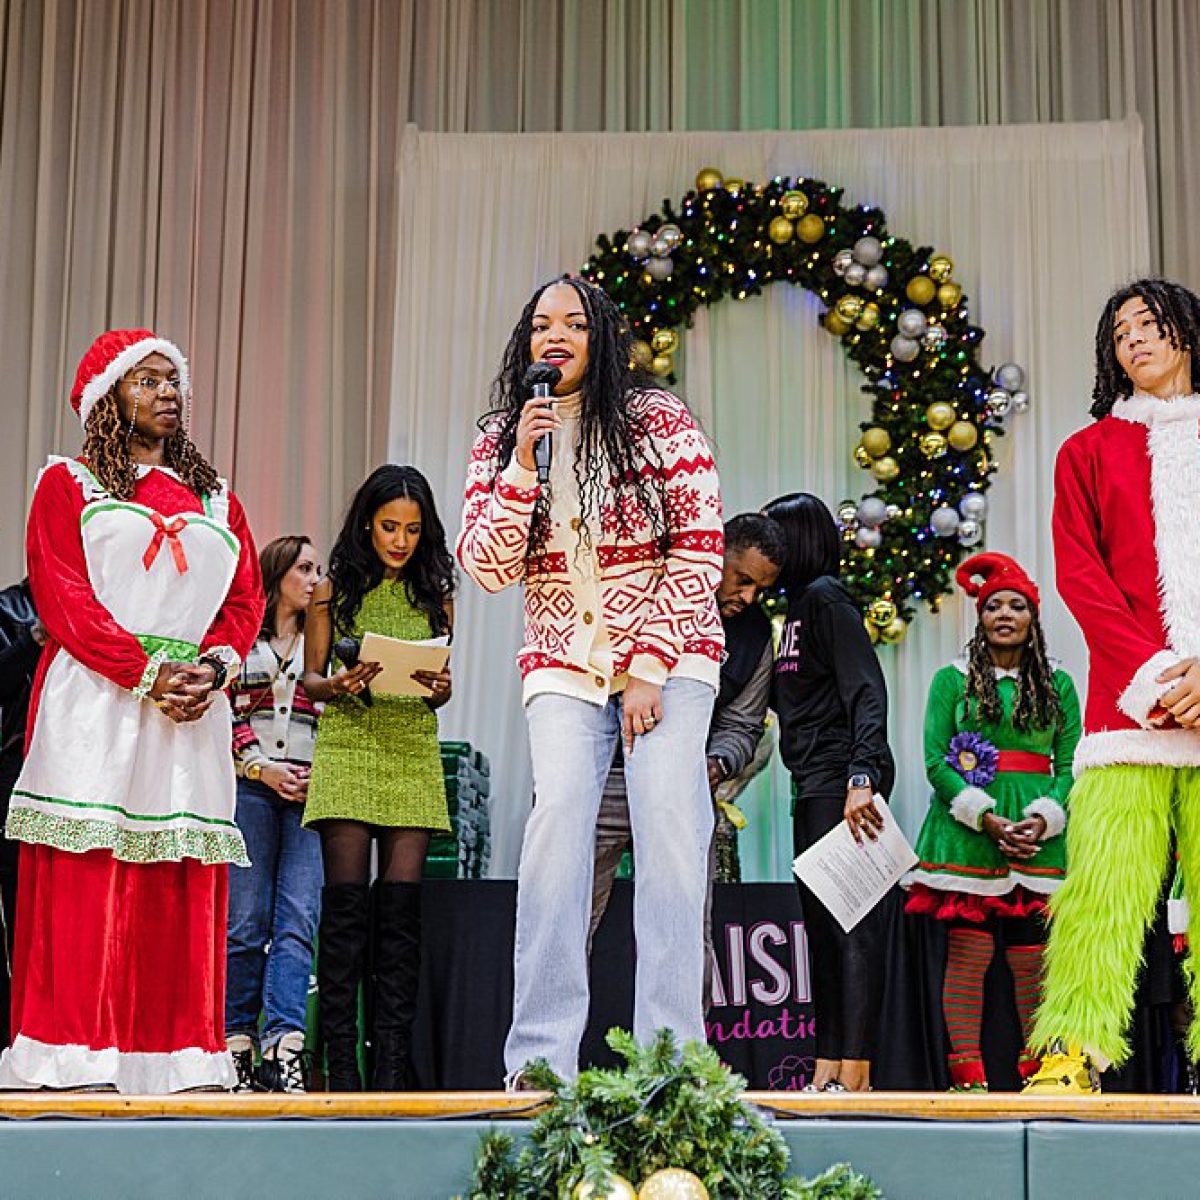 Daisie Foundation's Holiday Event at Howe Elementary Featured on ABC Chicago